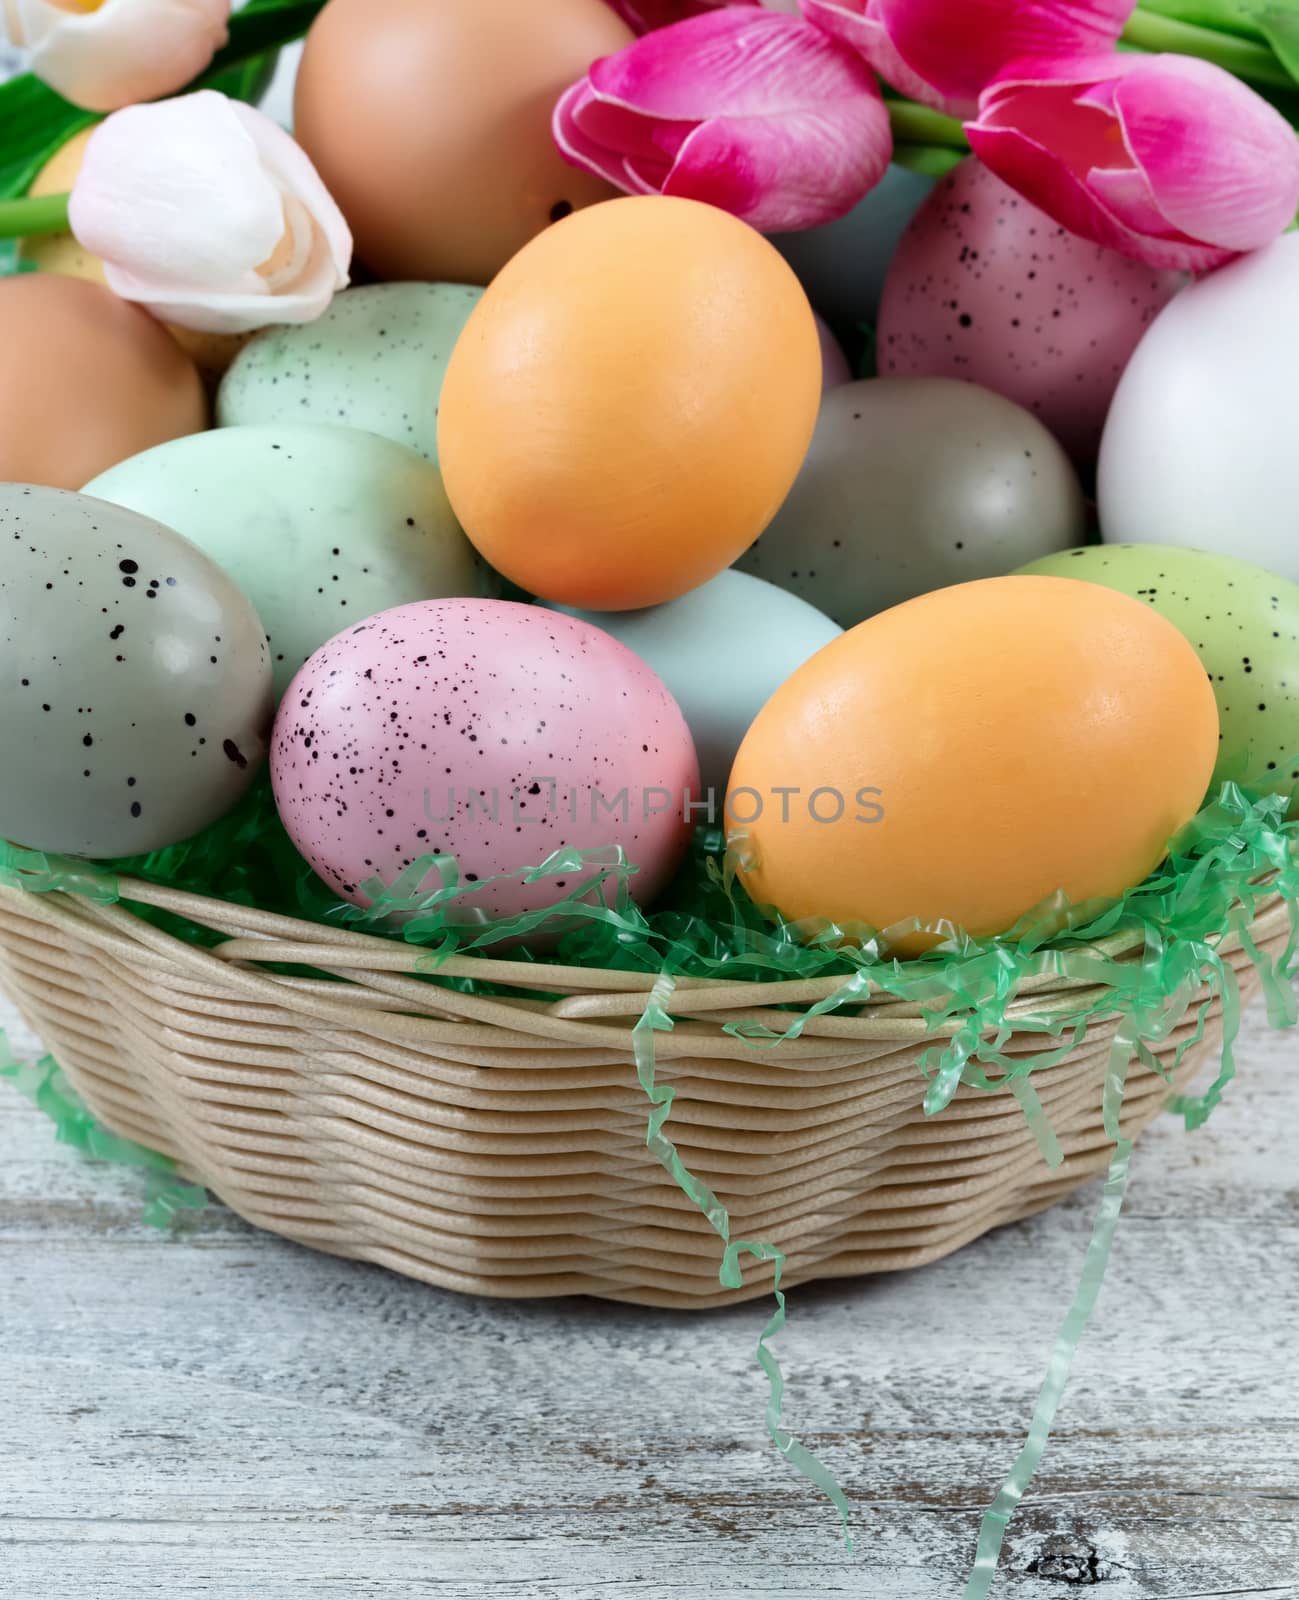 Basket of eggs and tulips for Easter holiday on white rustic woo by tab1962